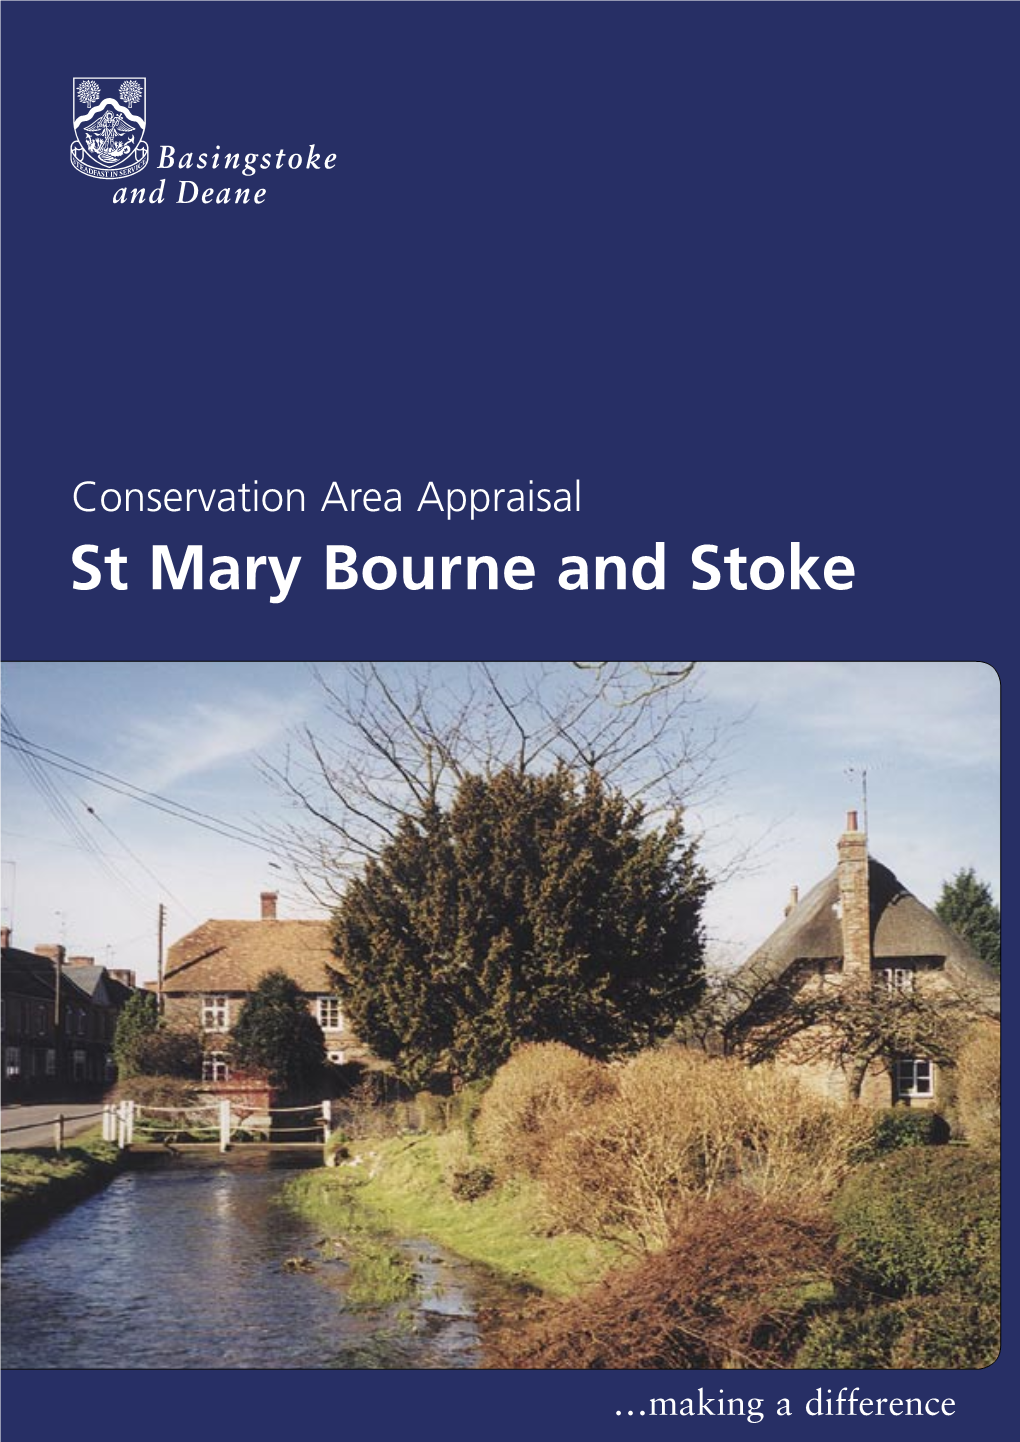 St Mary Bourne and Stoke Conservation Area Appraisal